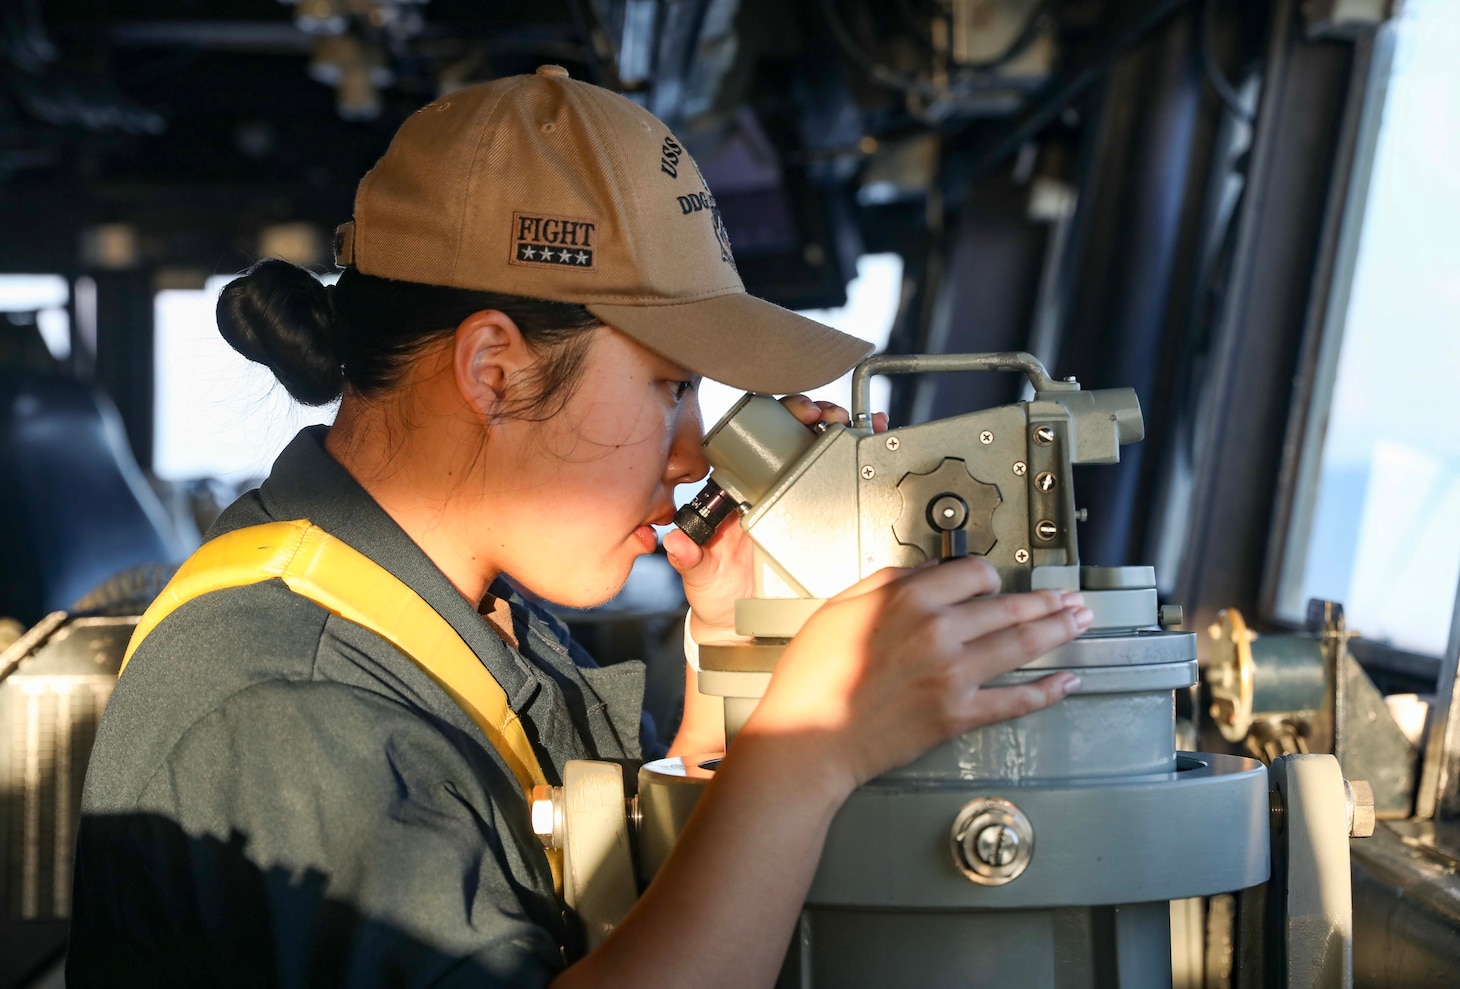 SOUTH CHINA SEA (Nov. 3, 2023) – Ensign Nicole Choi, from Paramus, New Jersey, looks through a telescopic alidade on the bridge as the Arleigh Burke-class guided-missile destroyer USS Dewey (DDG 105) conducts routine underway operations. Dewey is forward-deployed and assigned to Commander, Task Force 71/Destroyer Squadron (DESRON) 15, the Navy’s largest DESRON and the U.S. 7th Fleet’s principal surface force. (U.S. Navy photo by Mass Communication Specialist 1st Class Greg Johnson)